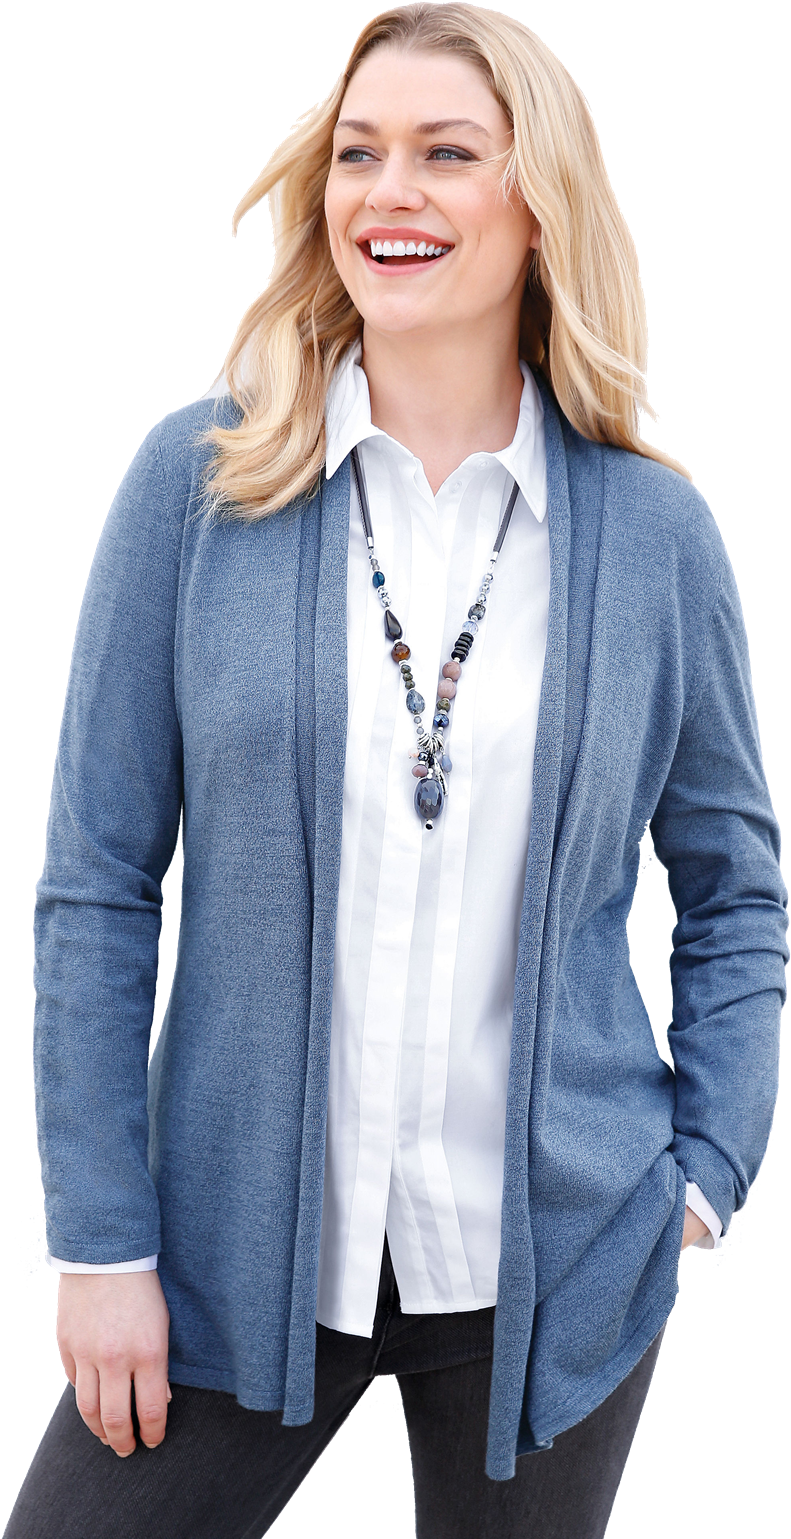 Smiling Womanin Blue Cardiganand White Shirt PNG image